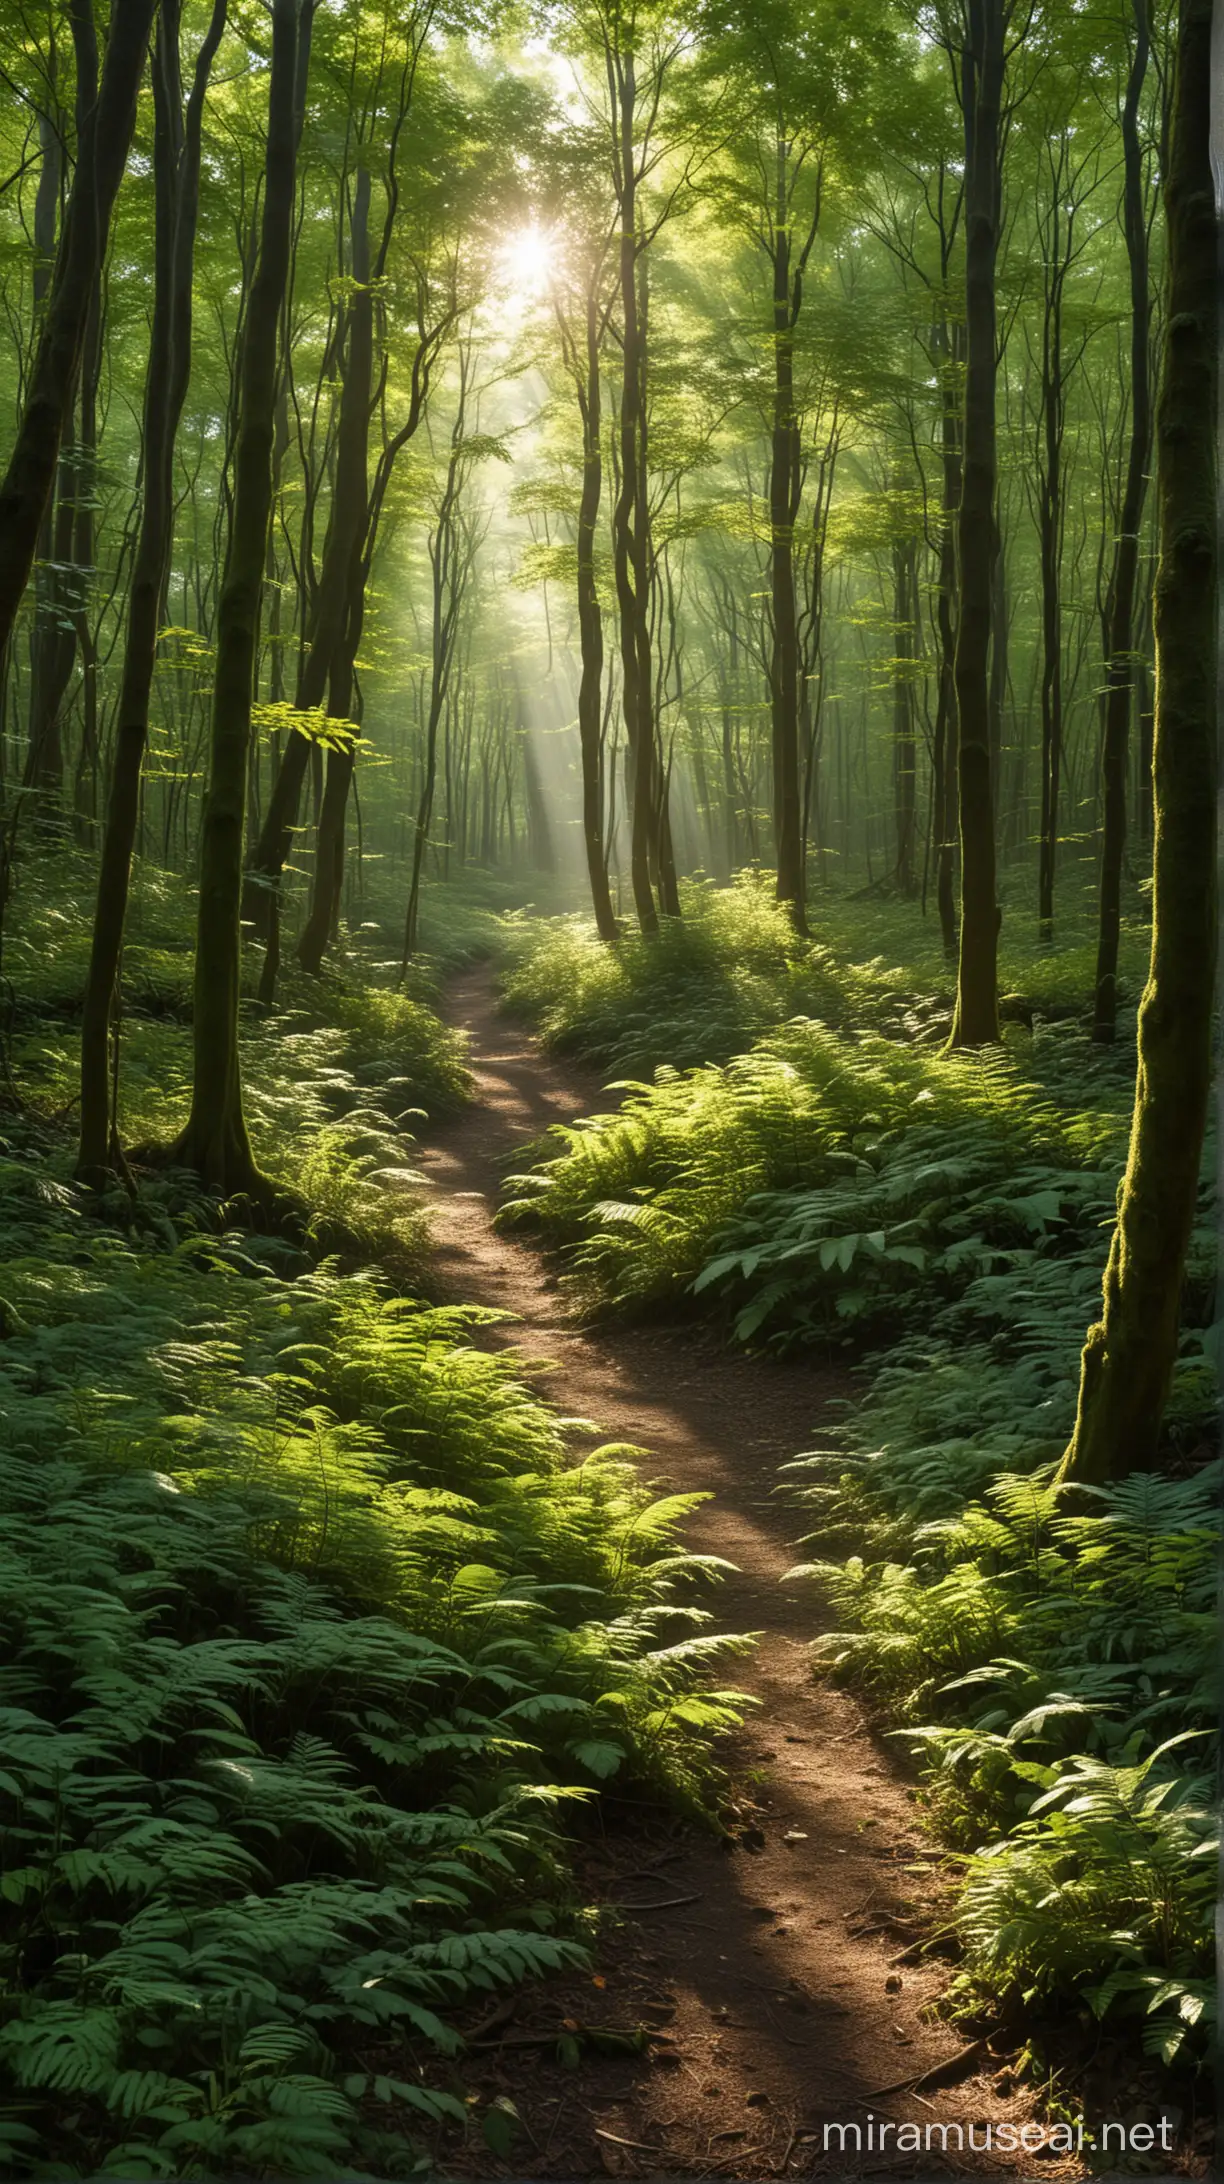 Enchanting Sunlit Green Forest Mysterious Beauty Captured in Lush Foliage